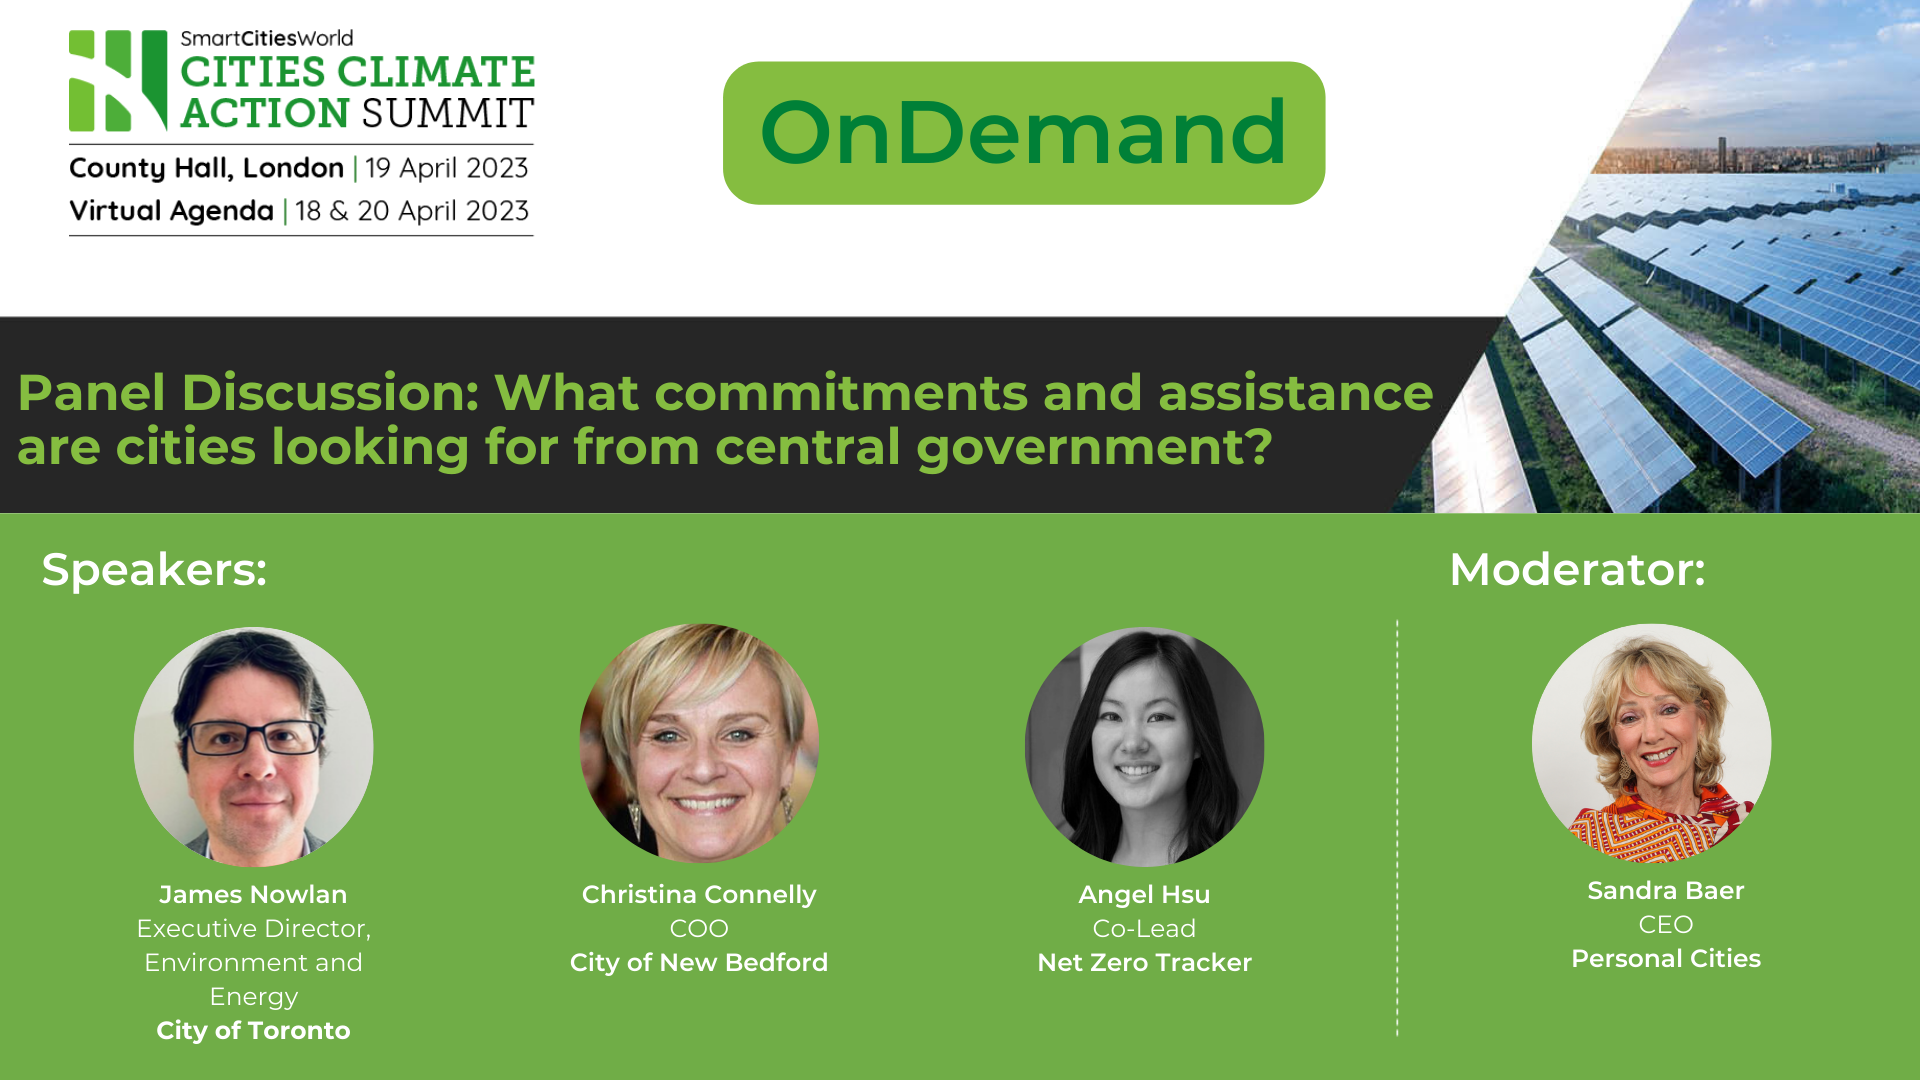 OnDemand Panel discussion: What commitments and assistance are cities looking for from central government?